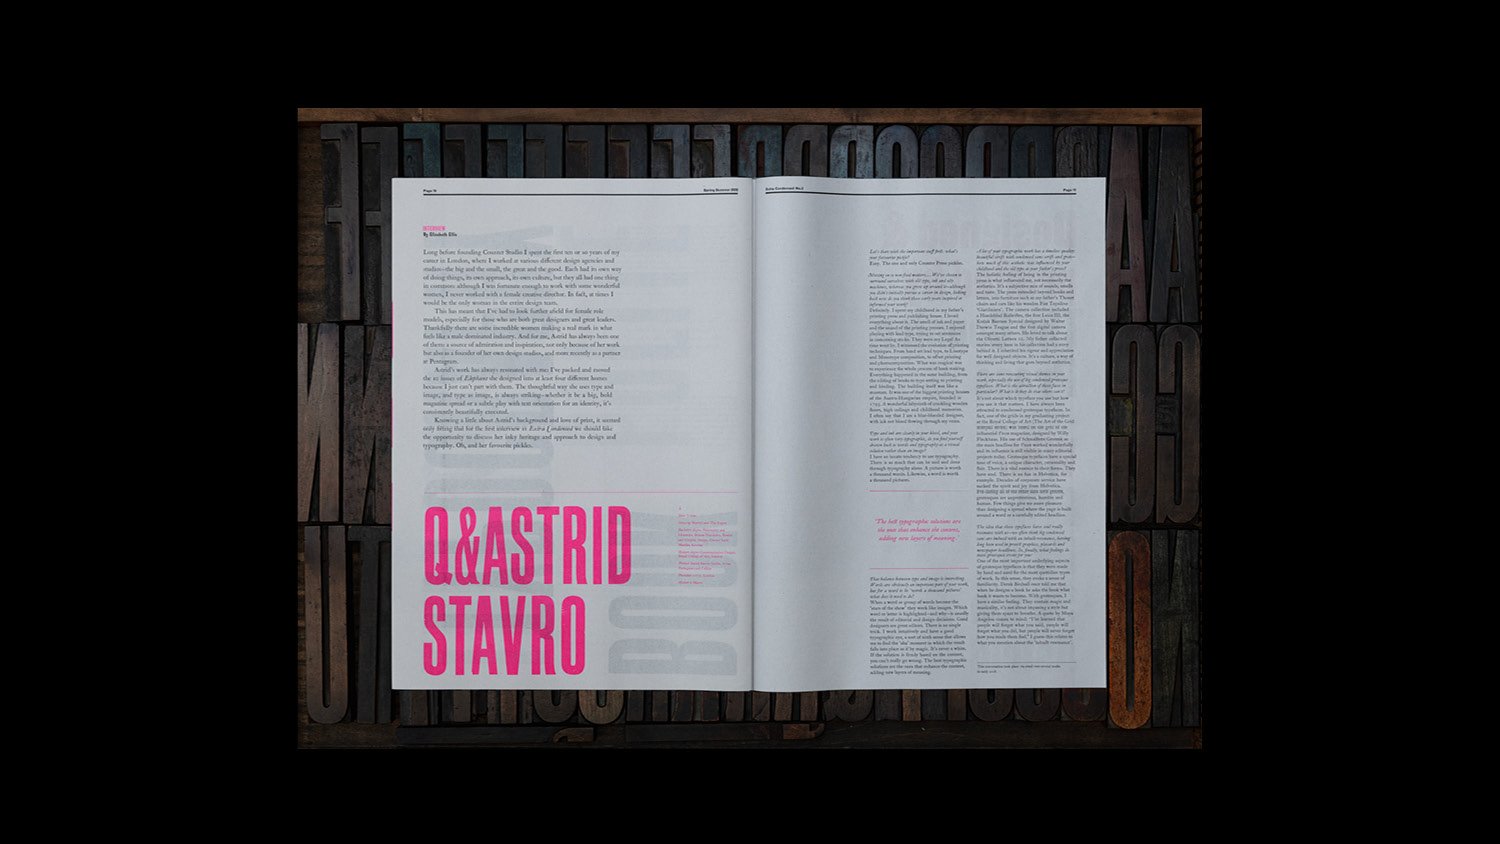   Final spread—An interview with Astrid Stavro   